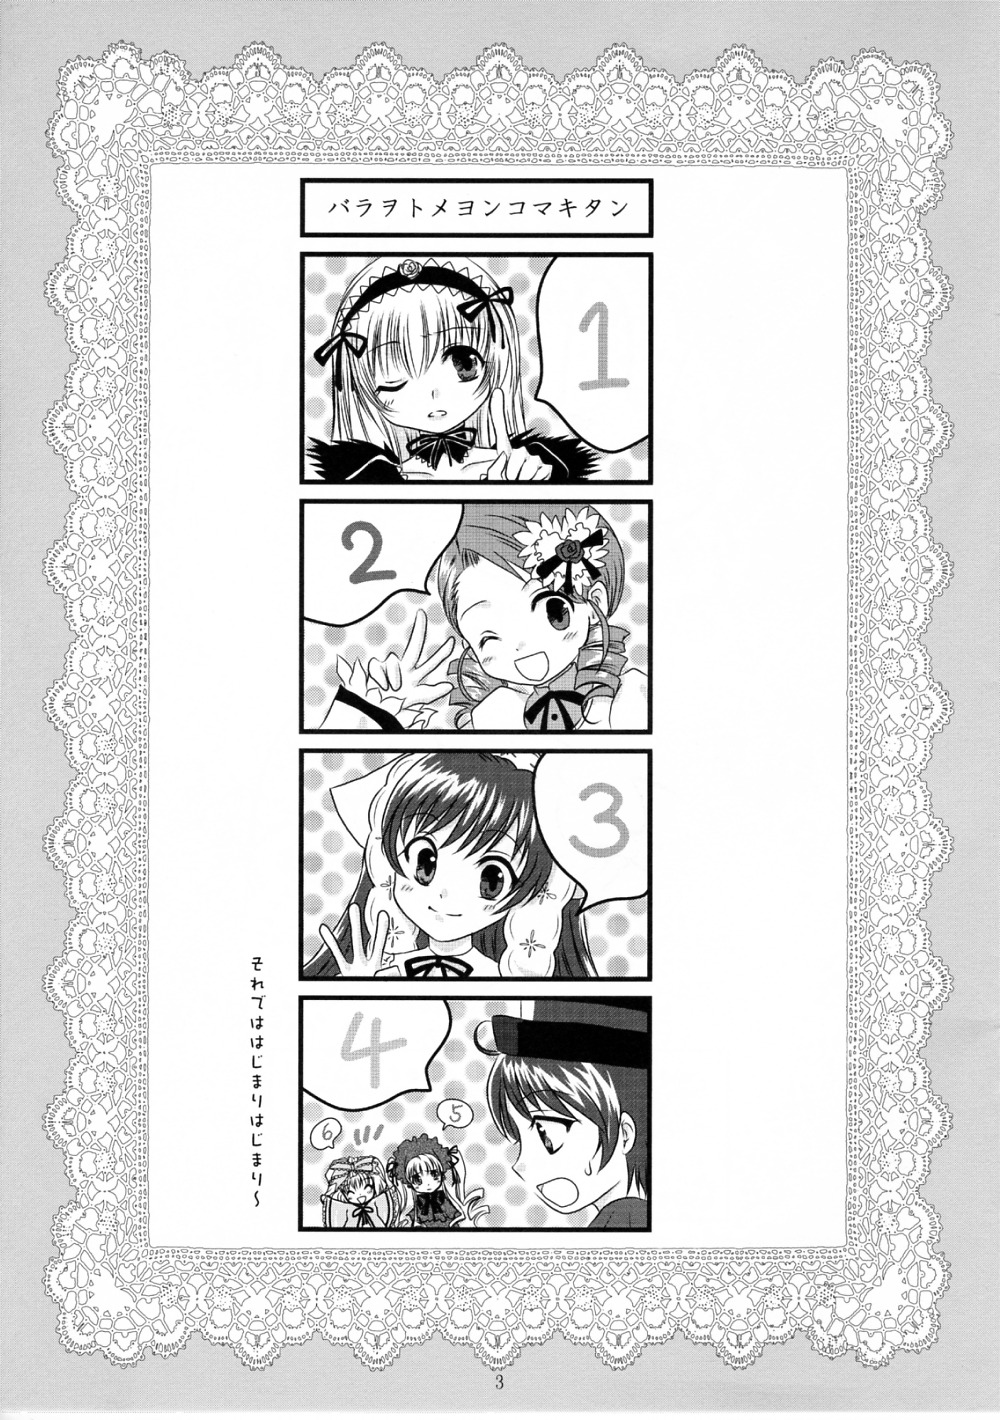 ? blush comic doujinshi doujinshi_#88 eighth_note greyscale image long_hair monochrome multiple multiple_girls musical_note one_eye_closed open_mouth smile suigintou